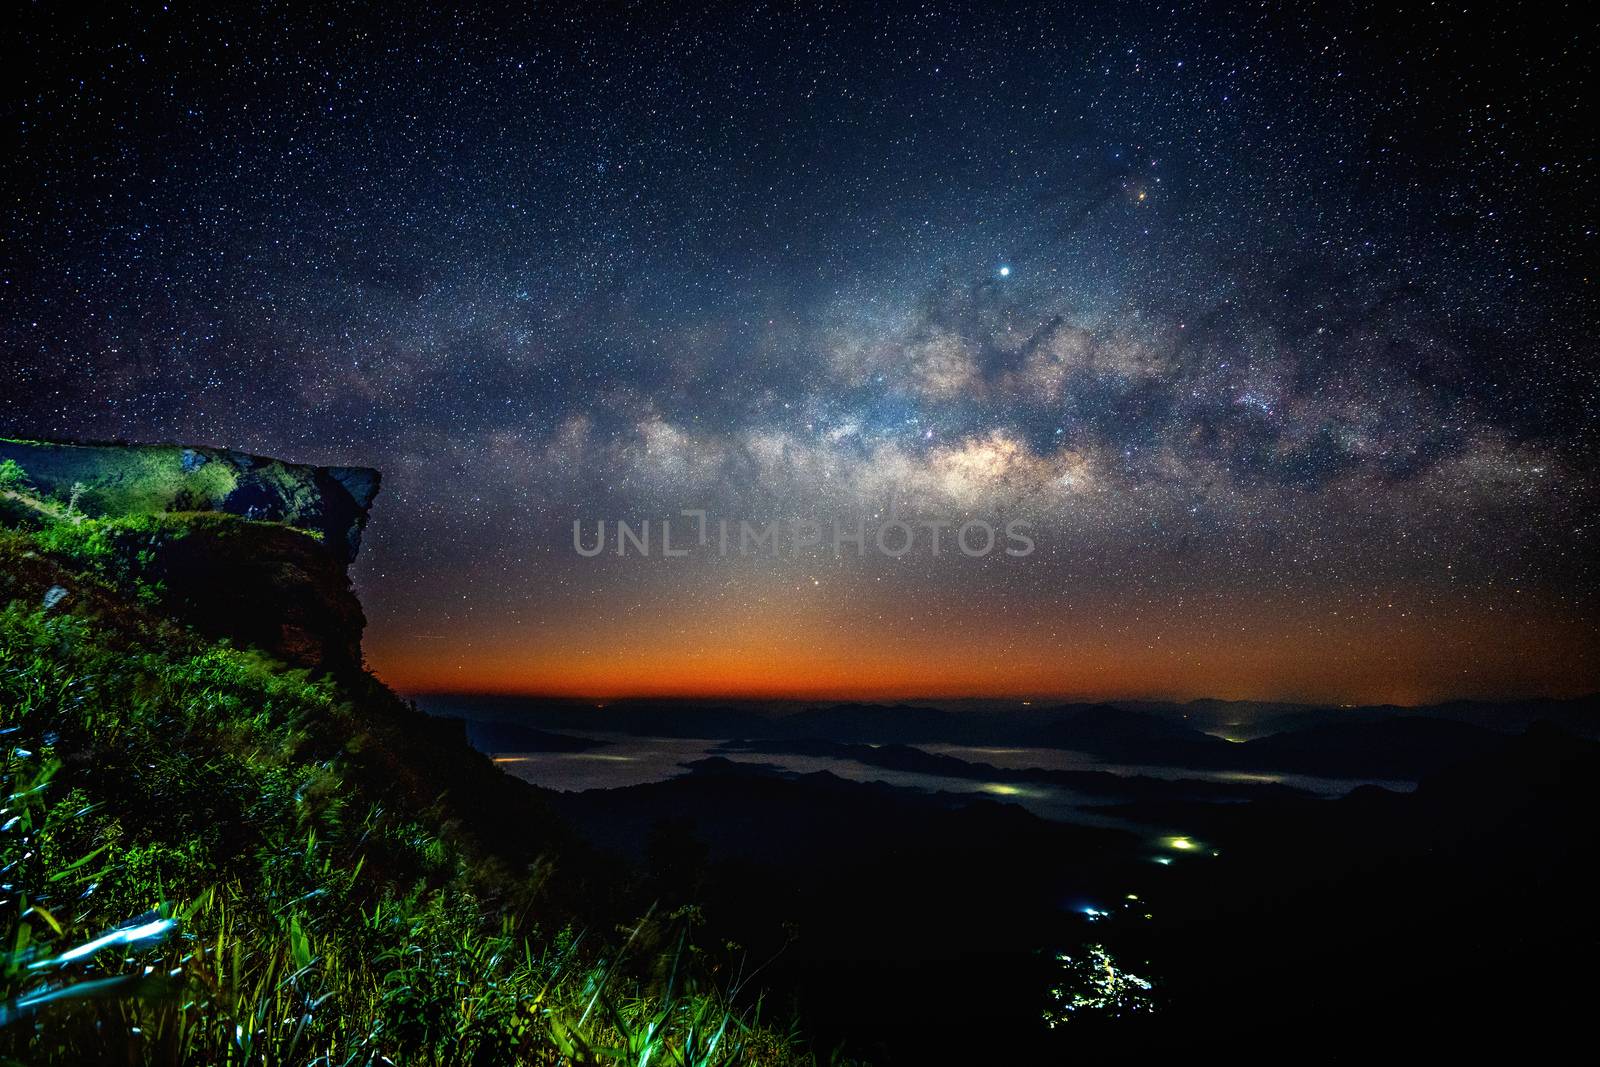 Milky way and star over Phu chi fa at night in Chiangrai, Thailand. by gutarphotoghaphy